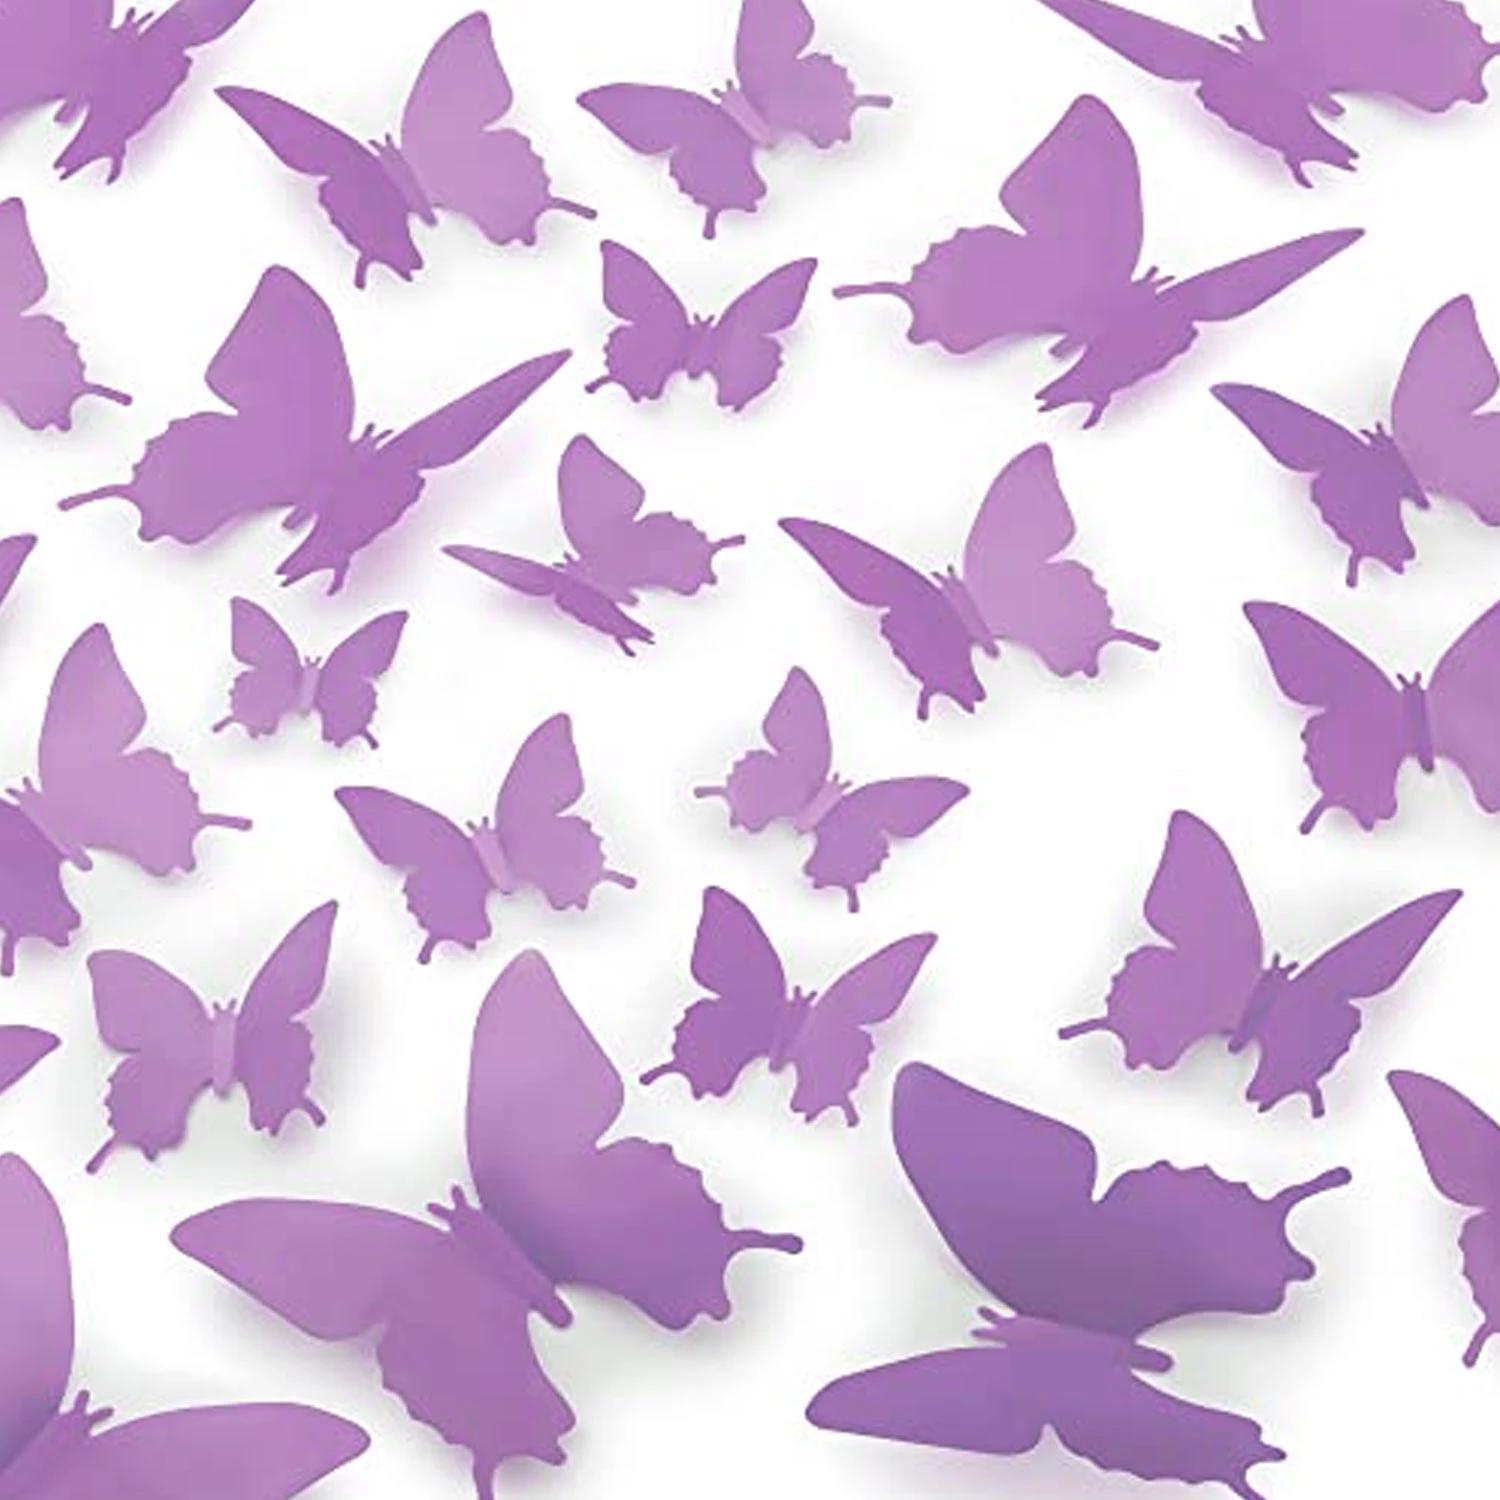 Zulay Home 3D Butterfly Wall Decor - 24pcs Butterfly Decor with 3 Different Sizes